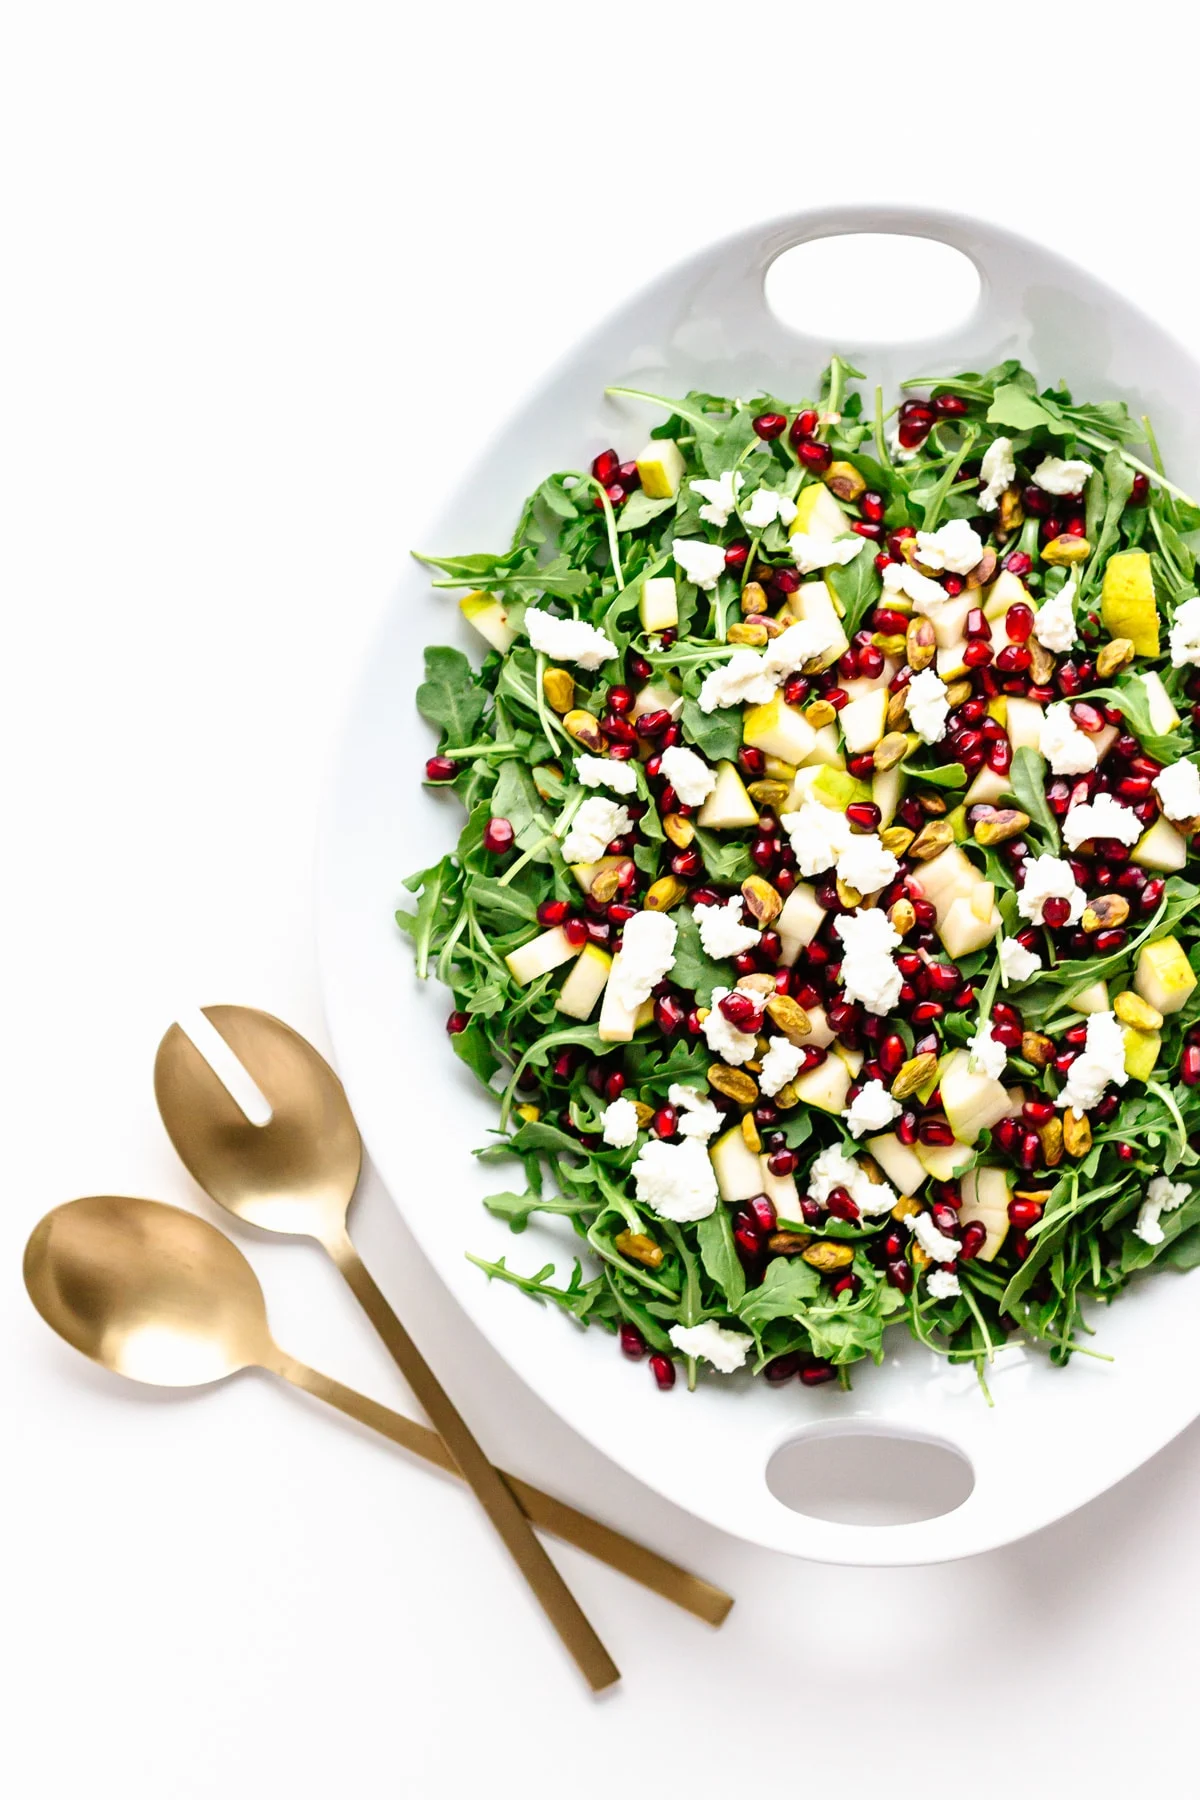 Winter holiday salad with pomegranate seeds, pears, goat cheese, and pistachios